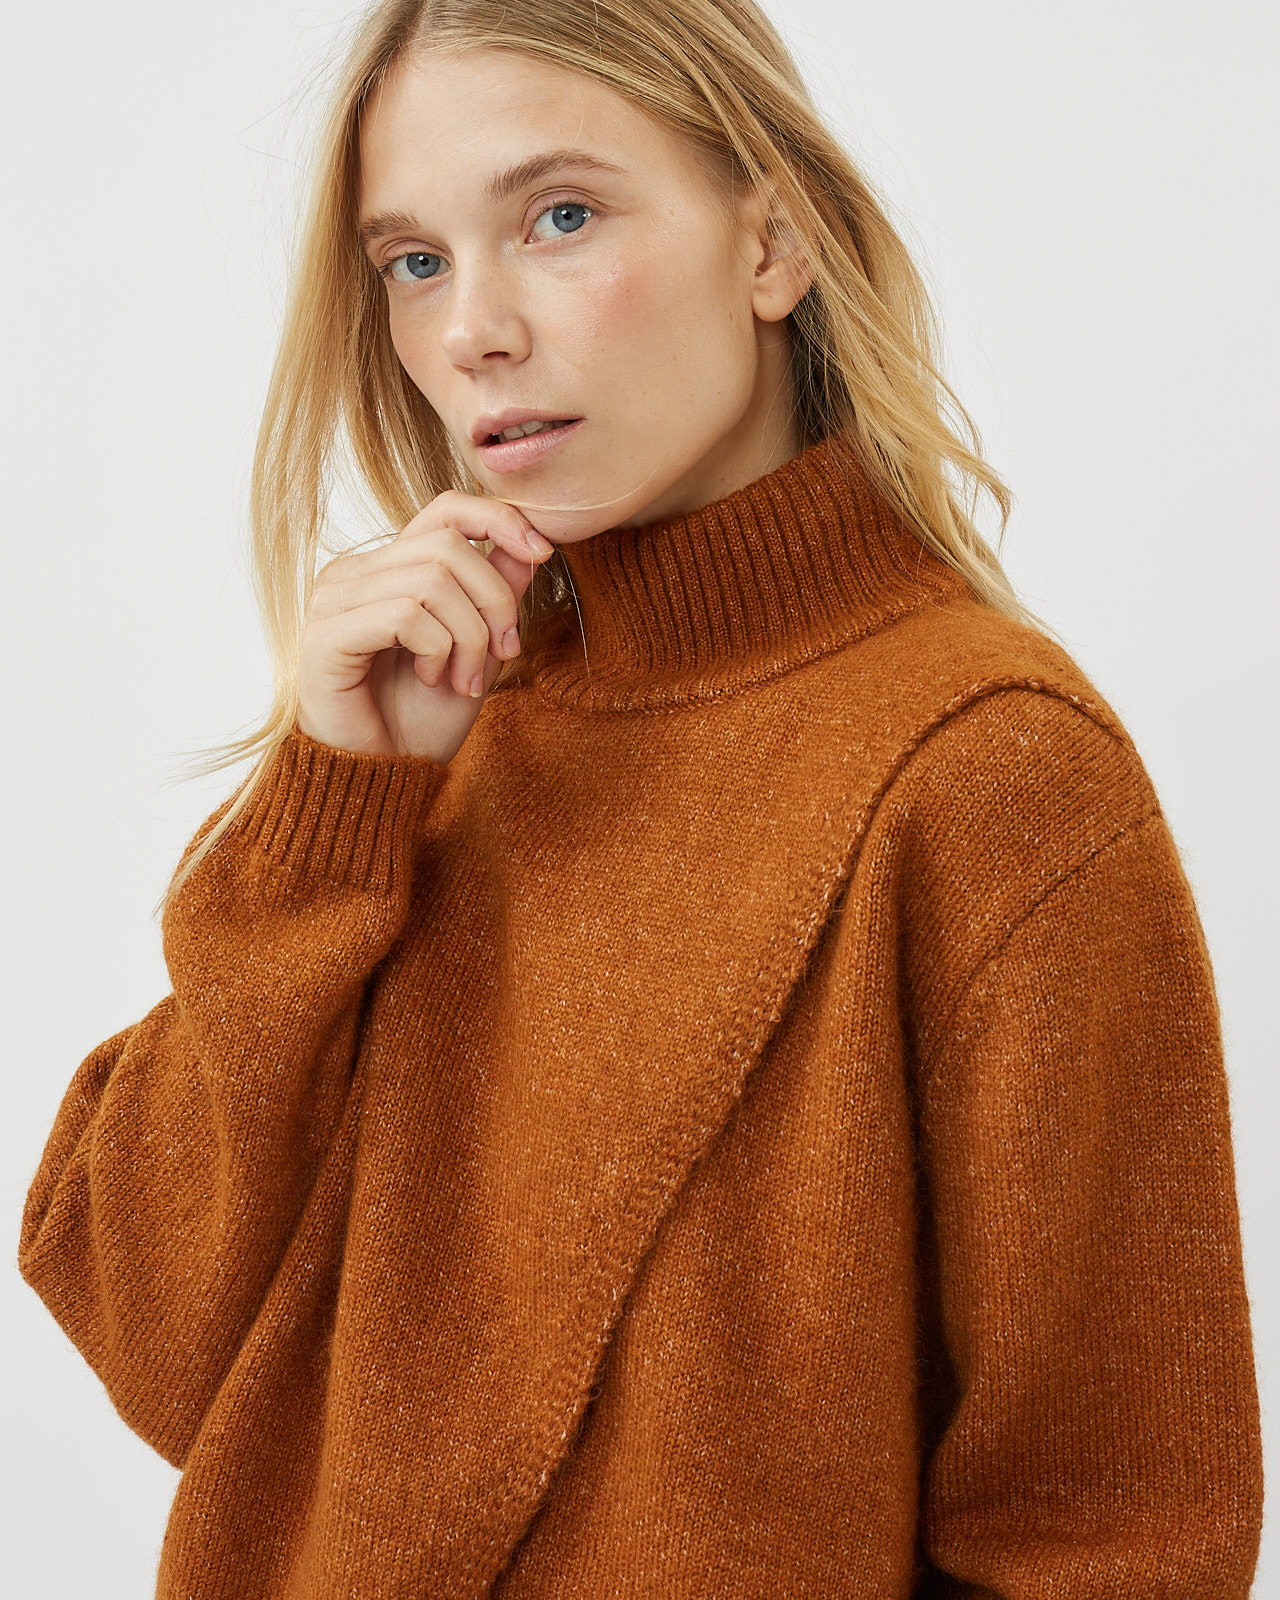 close up of a model wearing the Minimum Women's Meline Sweater in Roasted Pecan posing with her hand on her chin